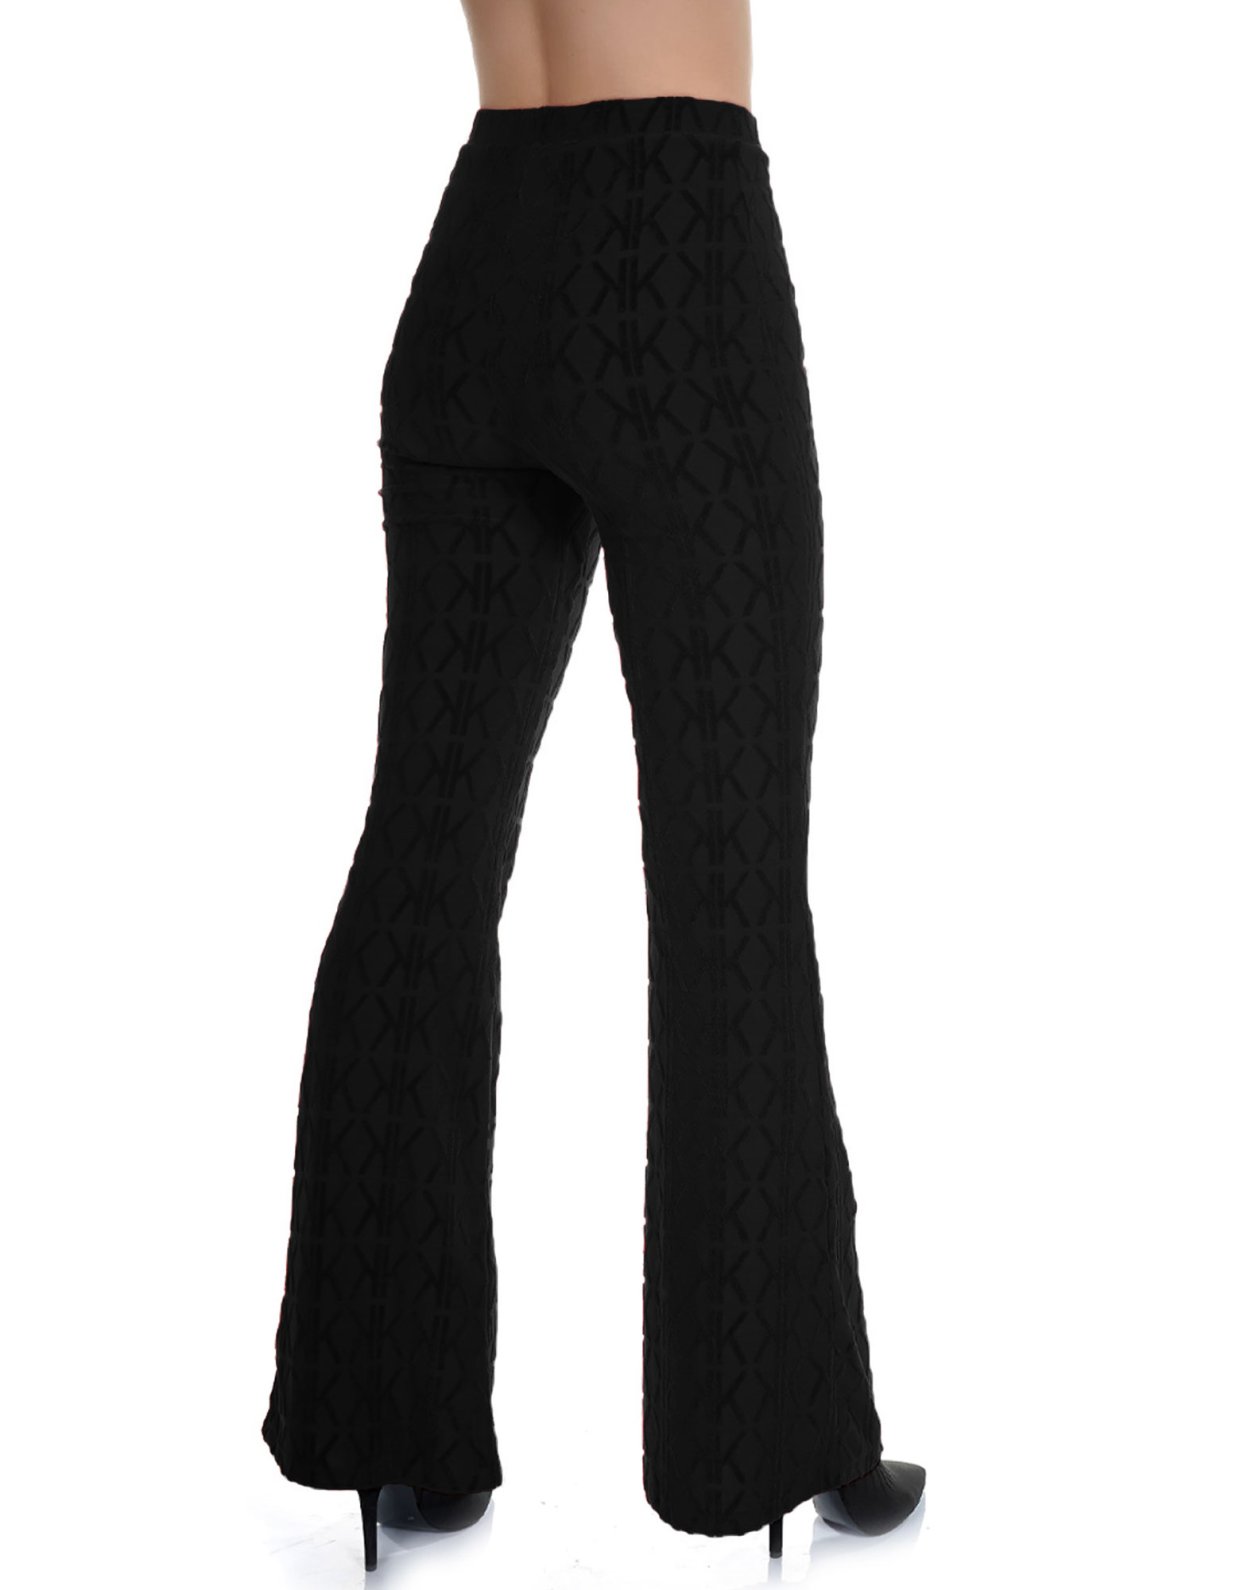 Kendall + Kylie Velour combo high rise flare pants black